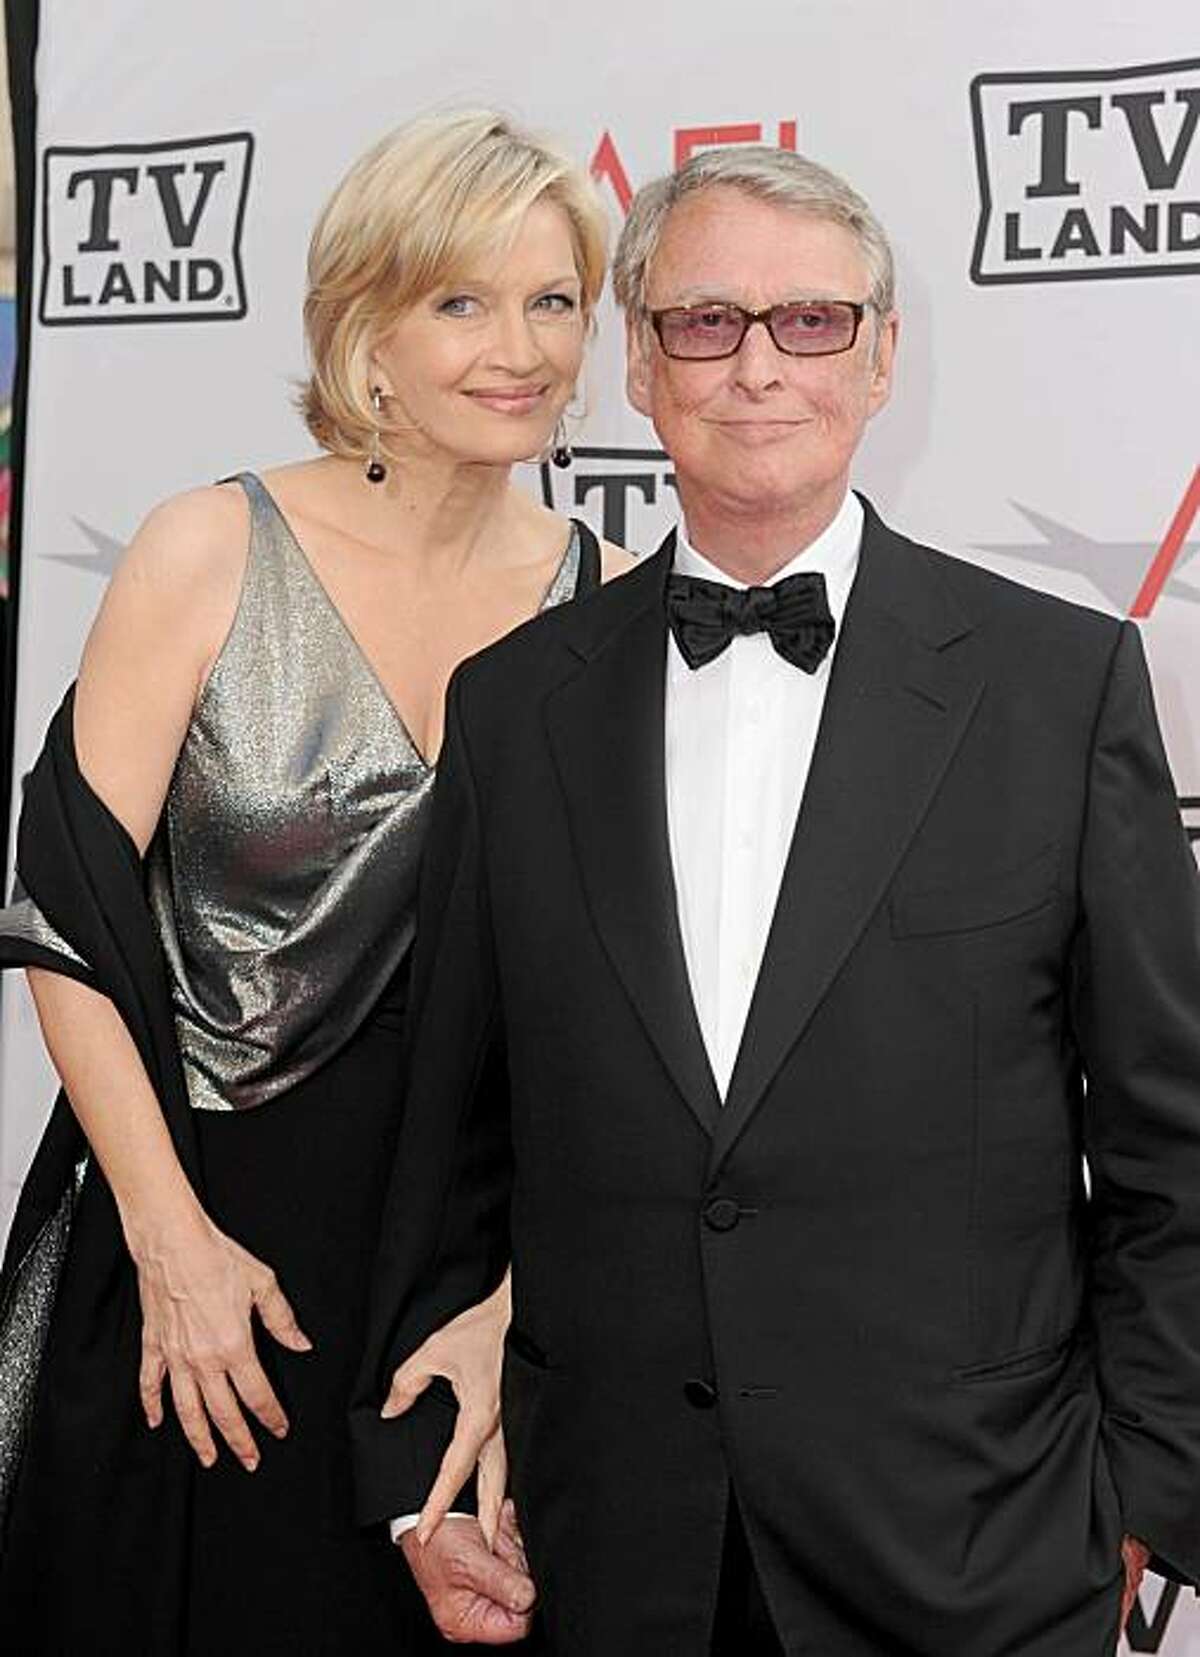 CULVER CITY, CA - JUNE 10: Journalist Diane Sawyer and honoree Mike Nichols arrive at the 38th AFI Life Achievement Award honoring Mike Nichols held at Sony Pictures Studios on June 10, 2010 in Culver City, California.